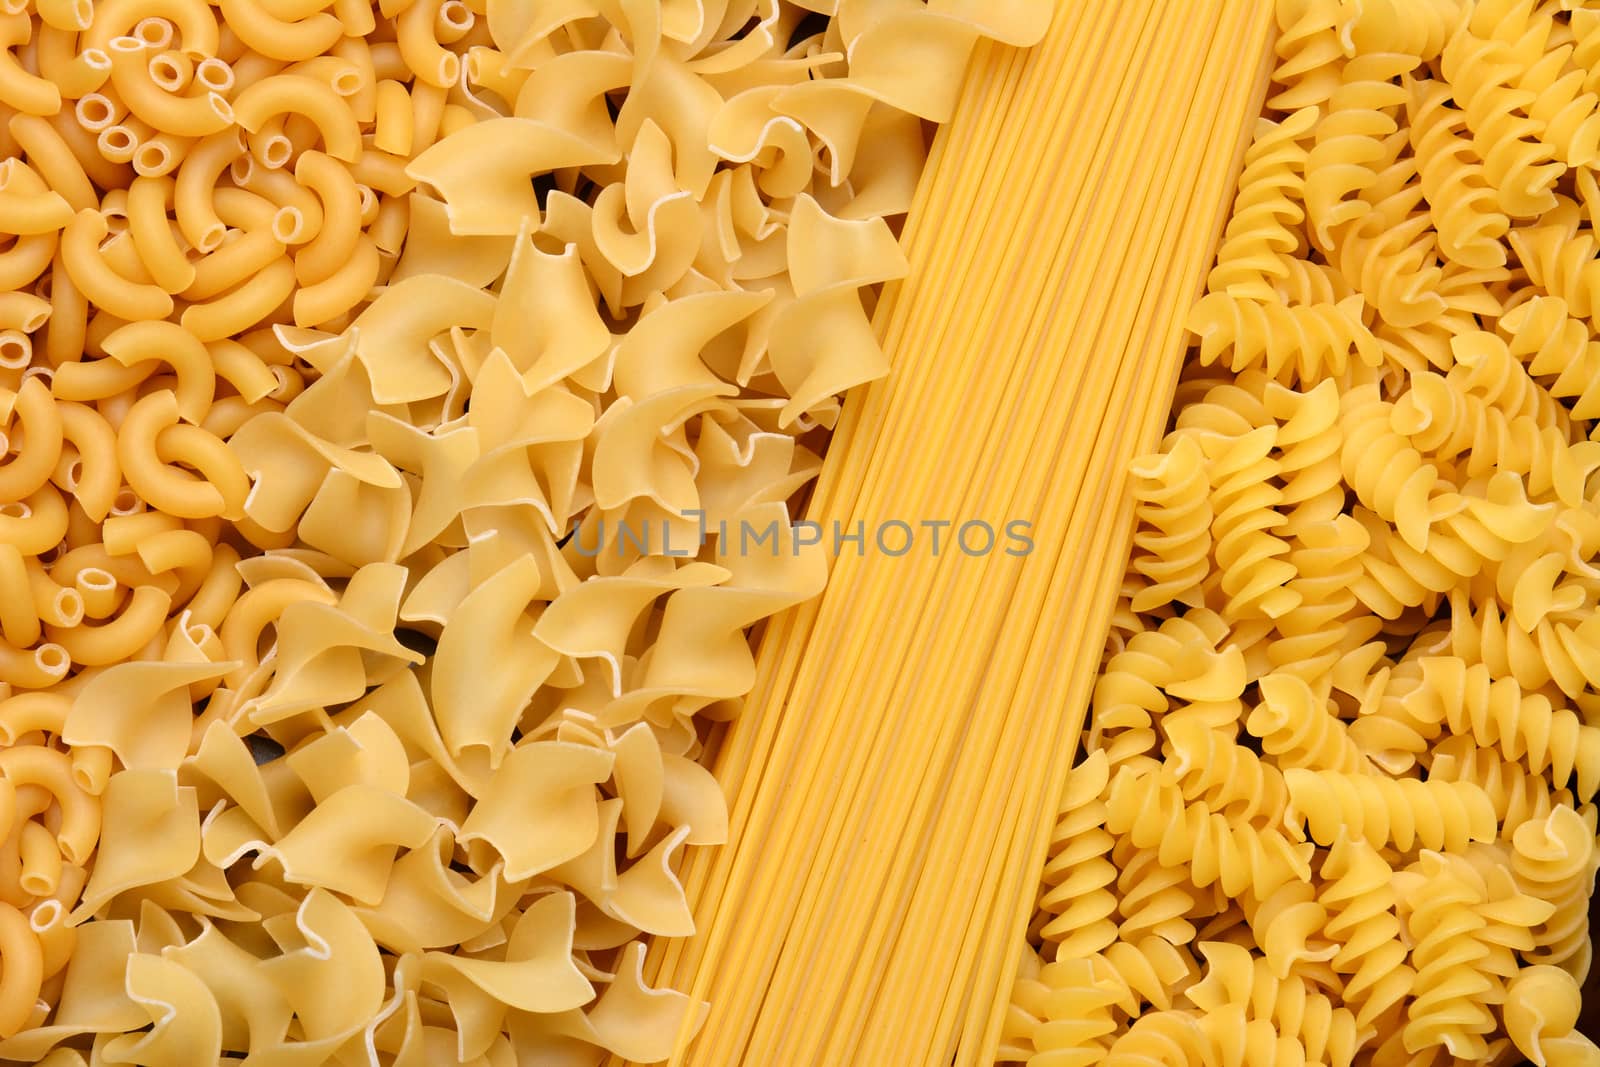 Closeup of a variety of different sizes and shapes of Italian pastas.